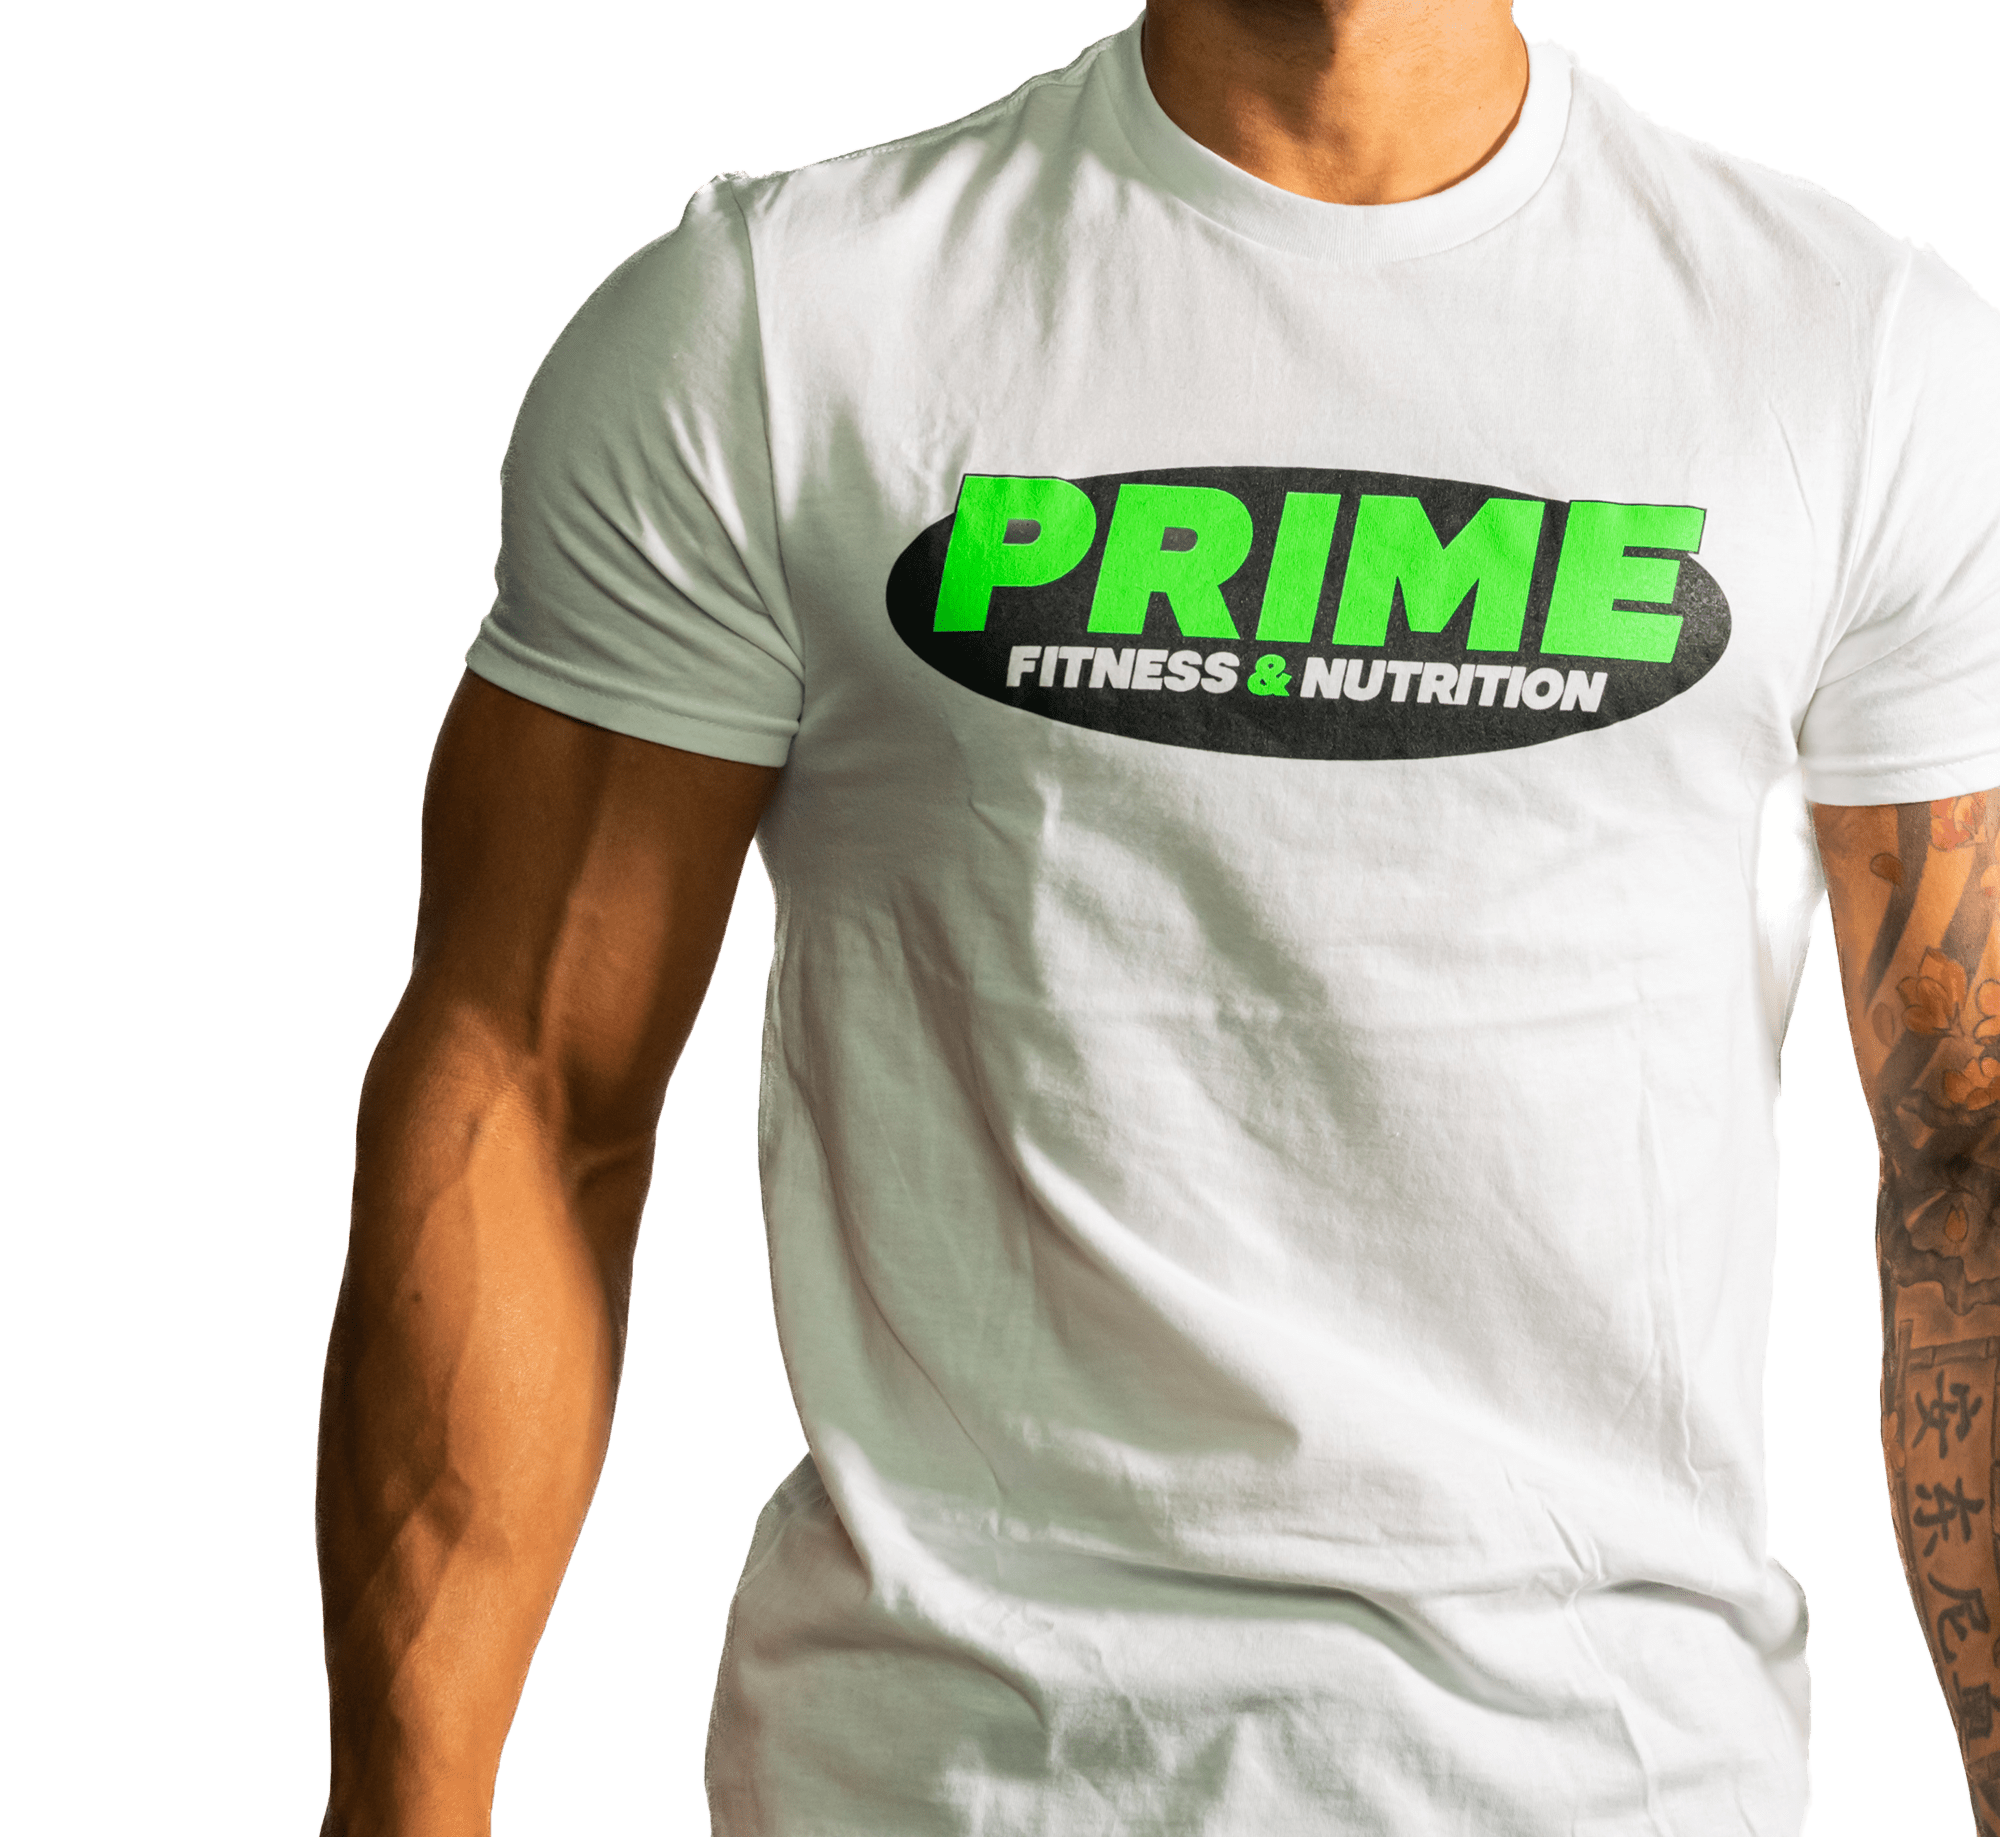 PRIME Fitness - The best gyms in the world choose PRIME. 👊🏼